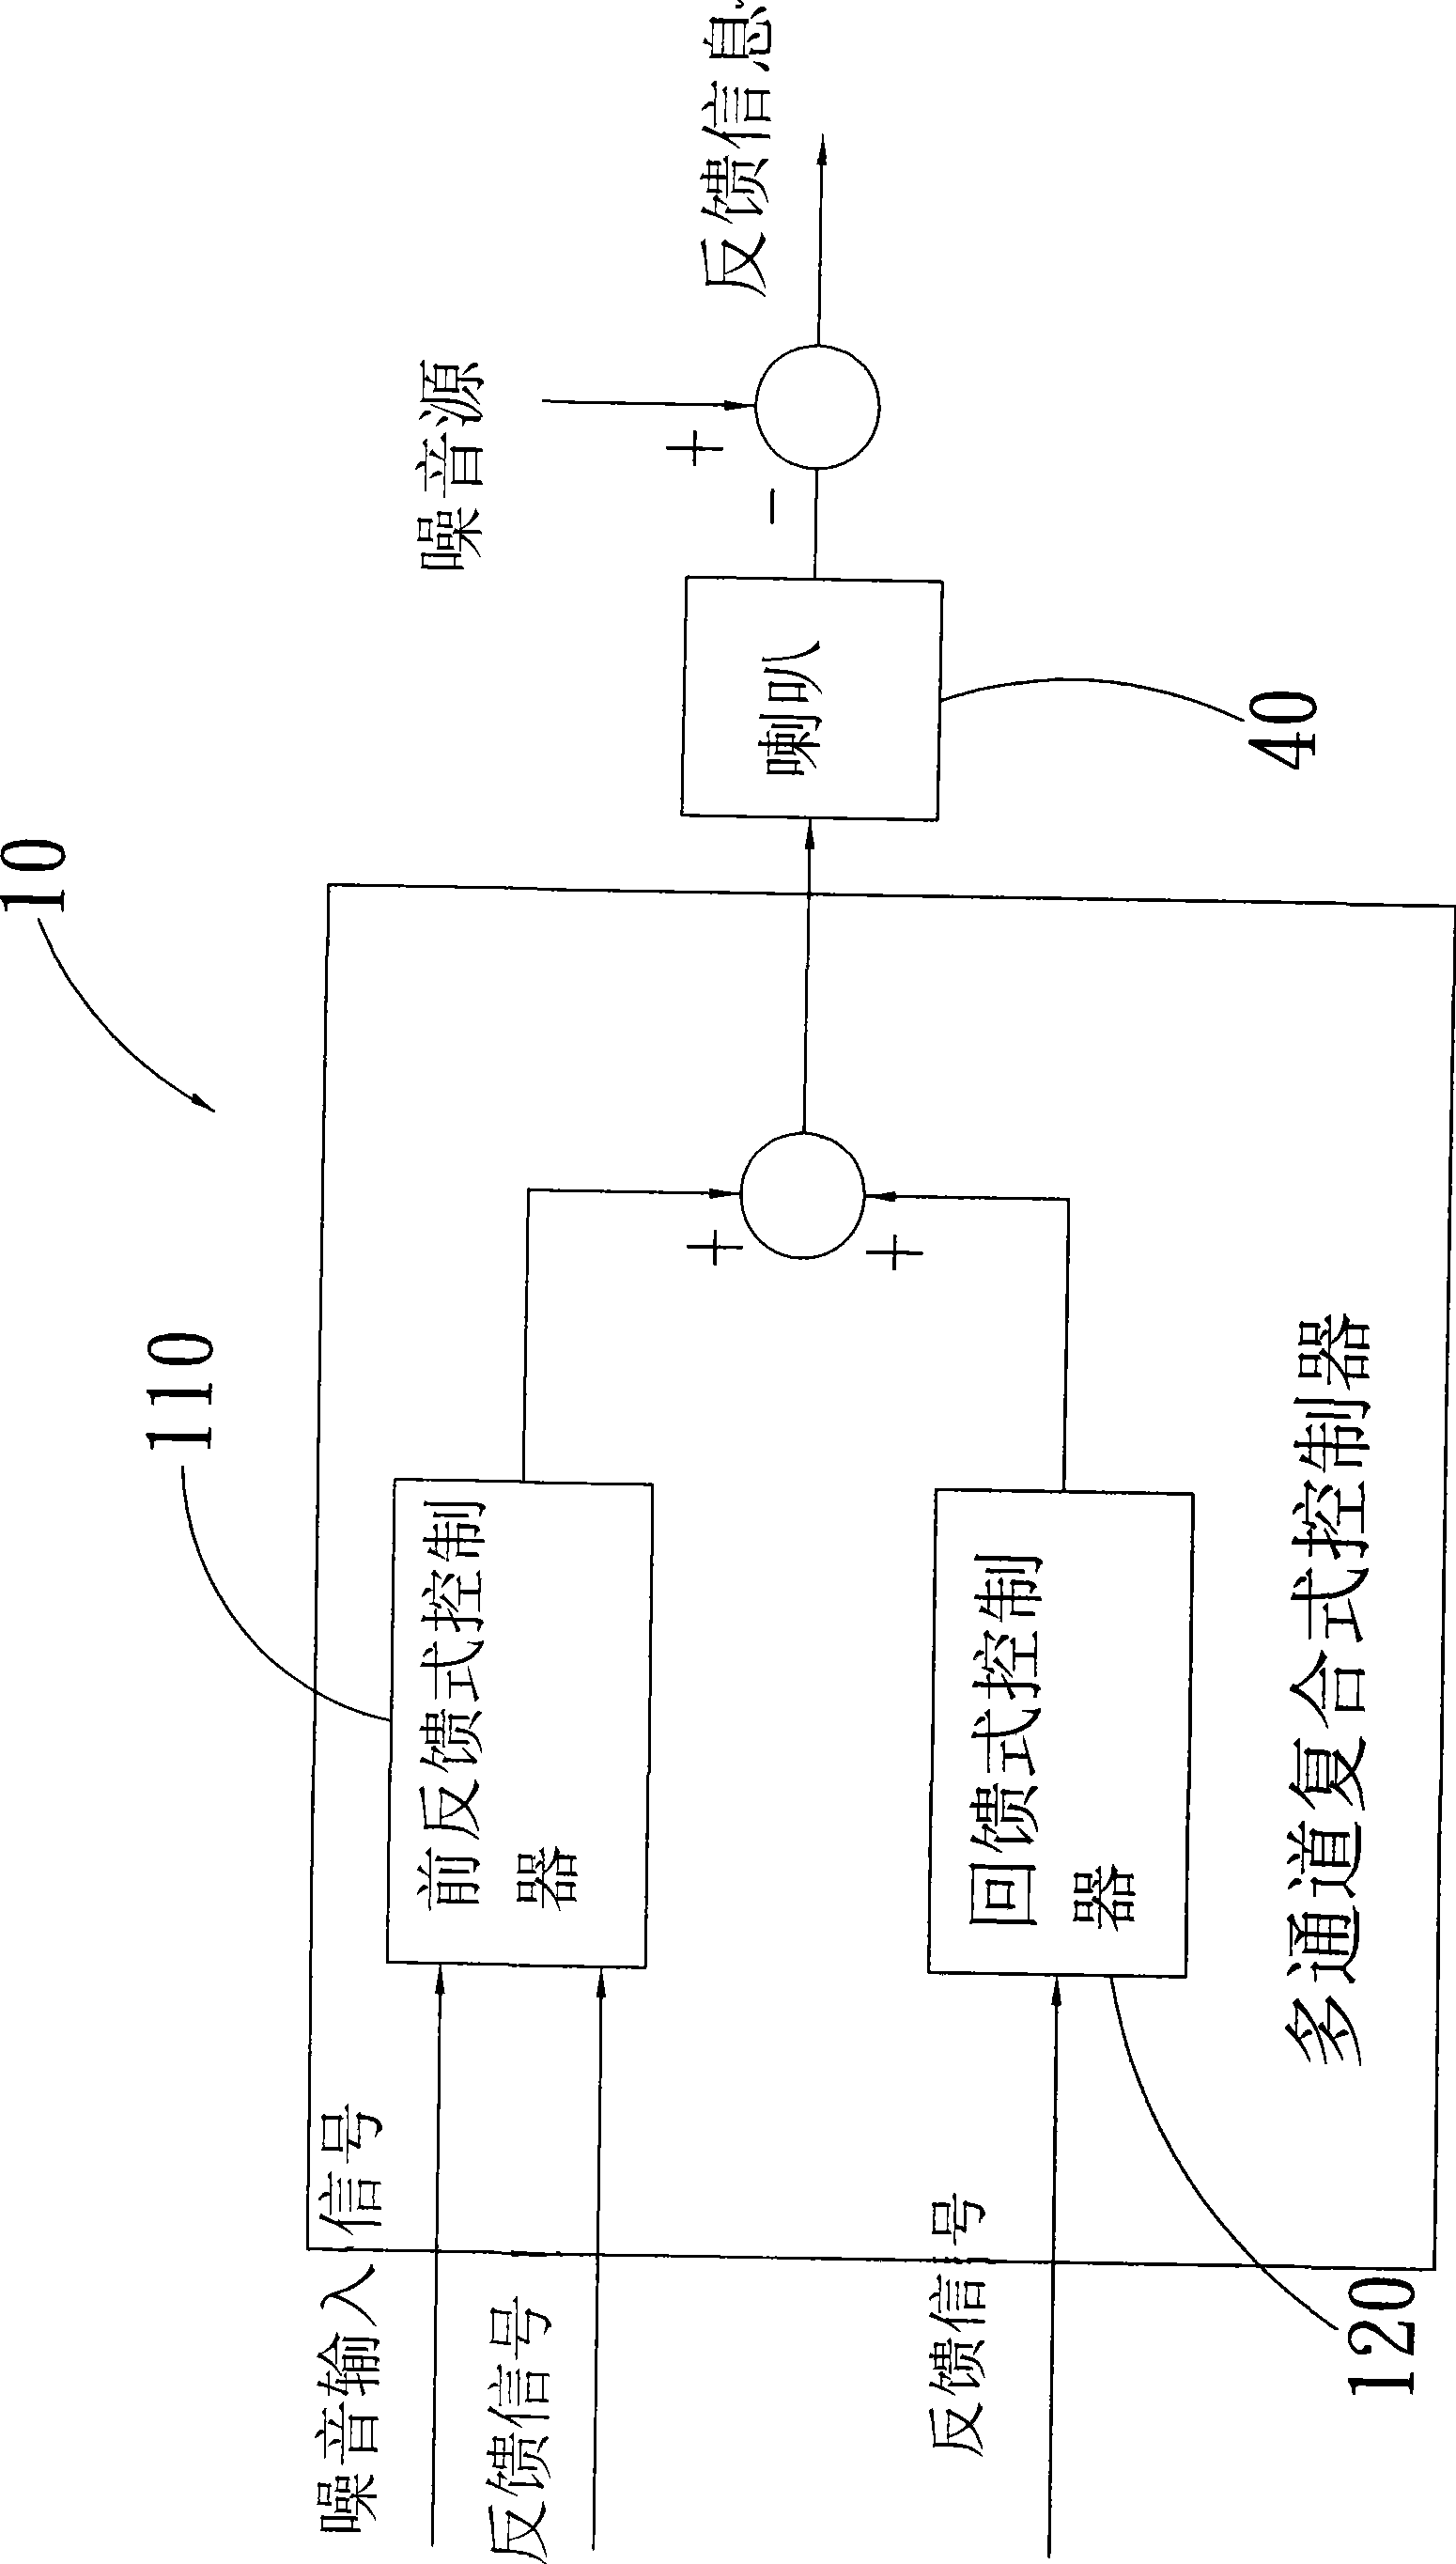 Wideband noise suppressing system for communication machine room